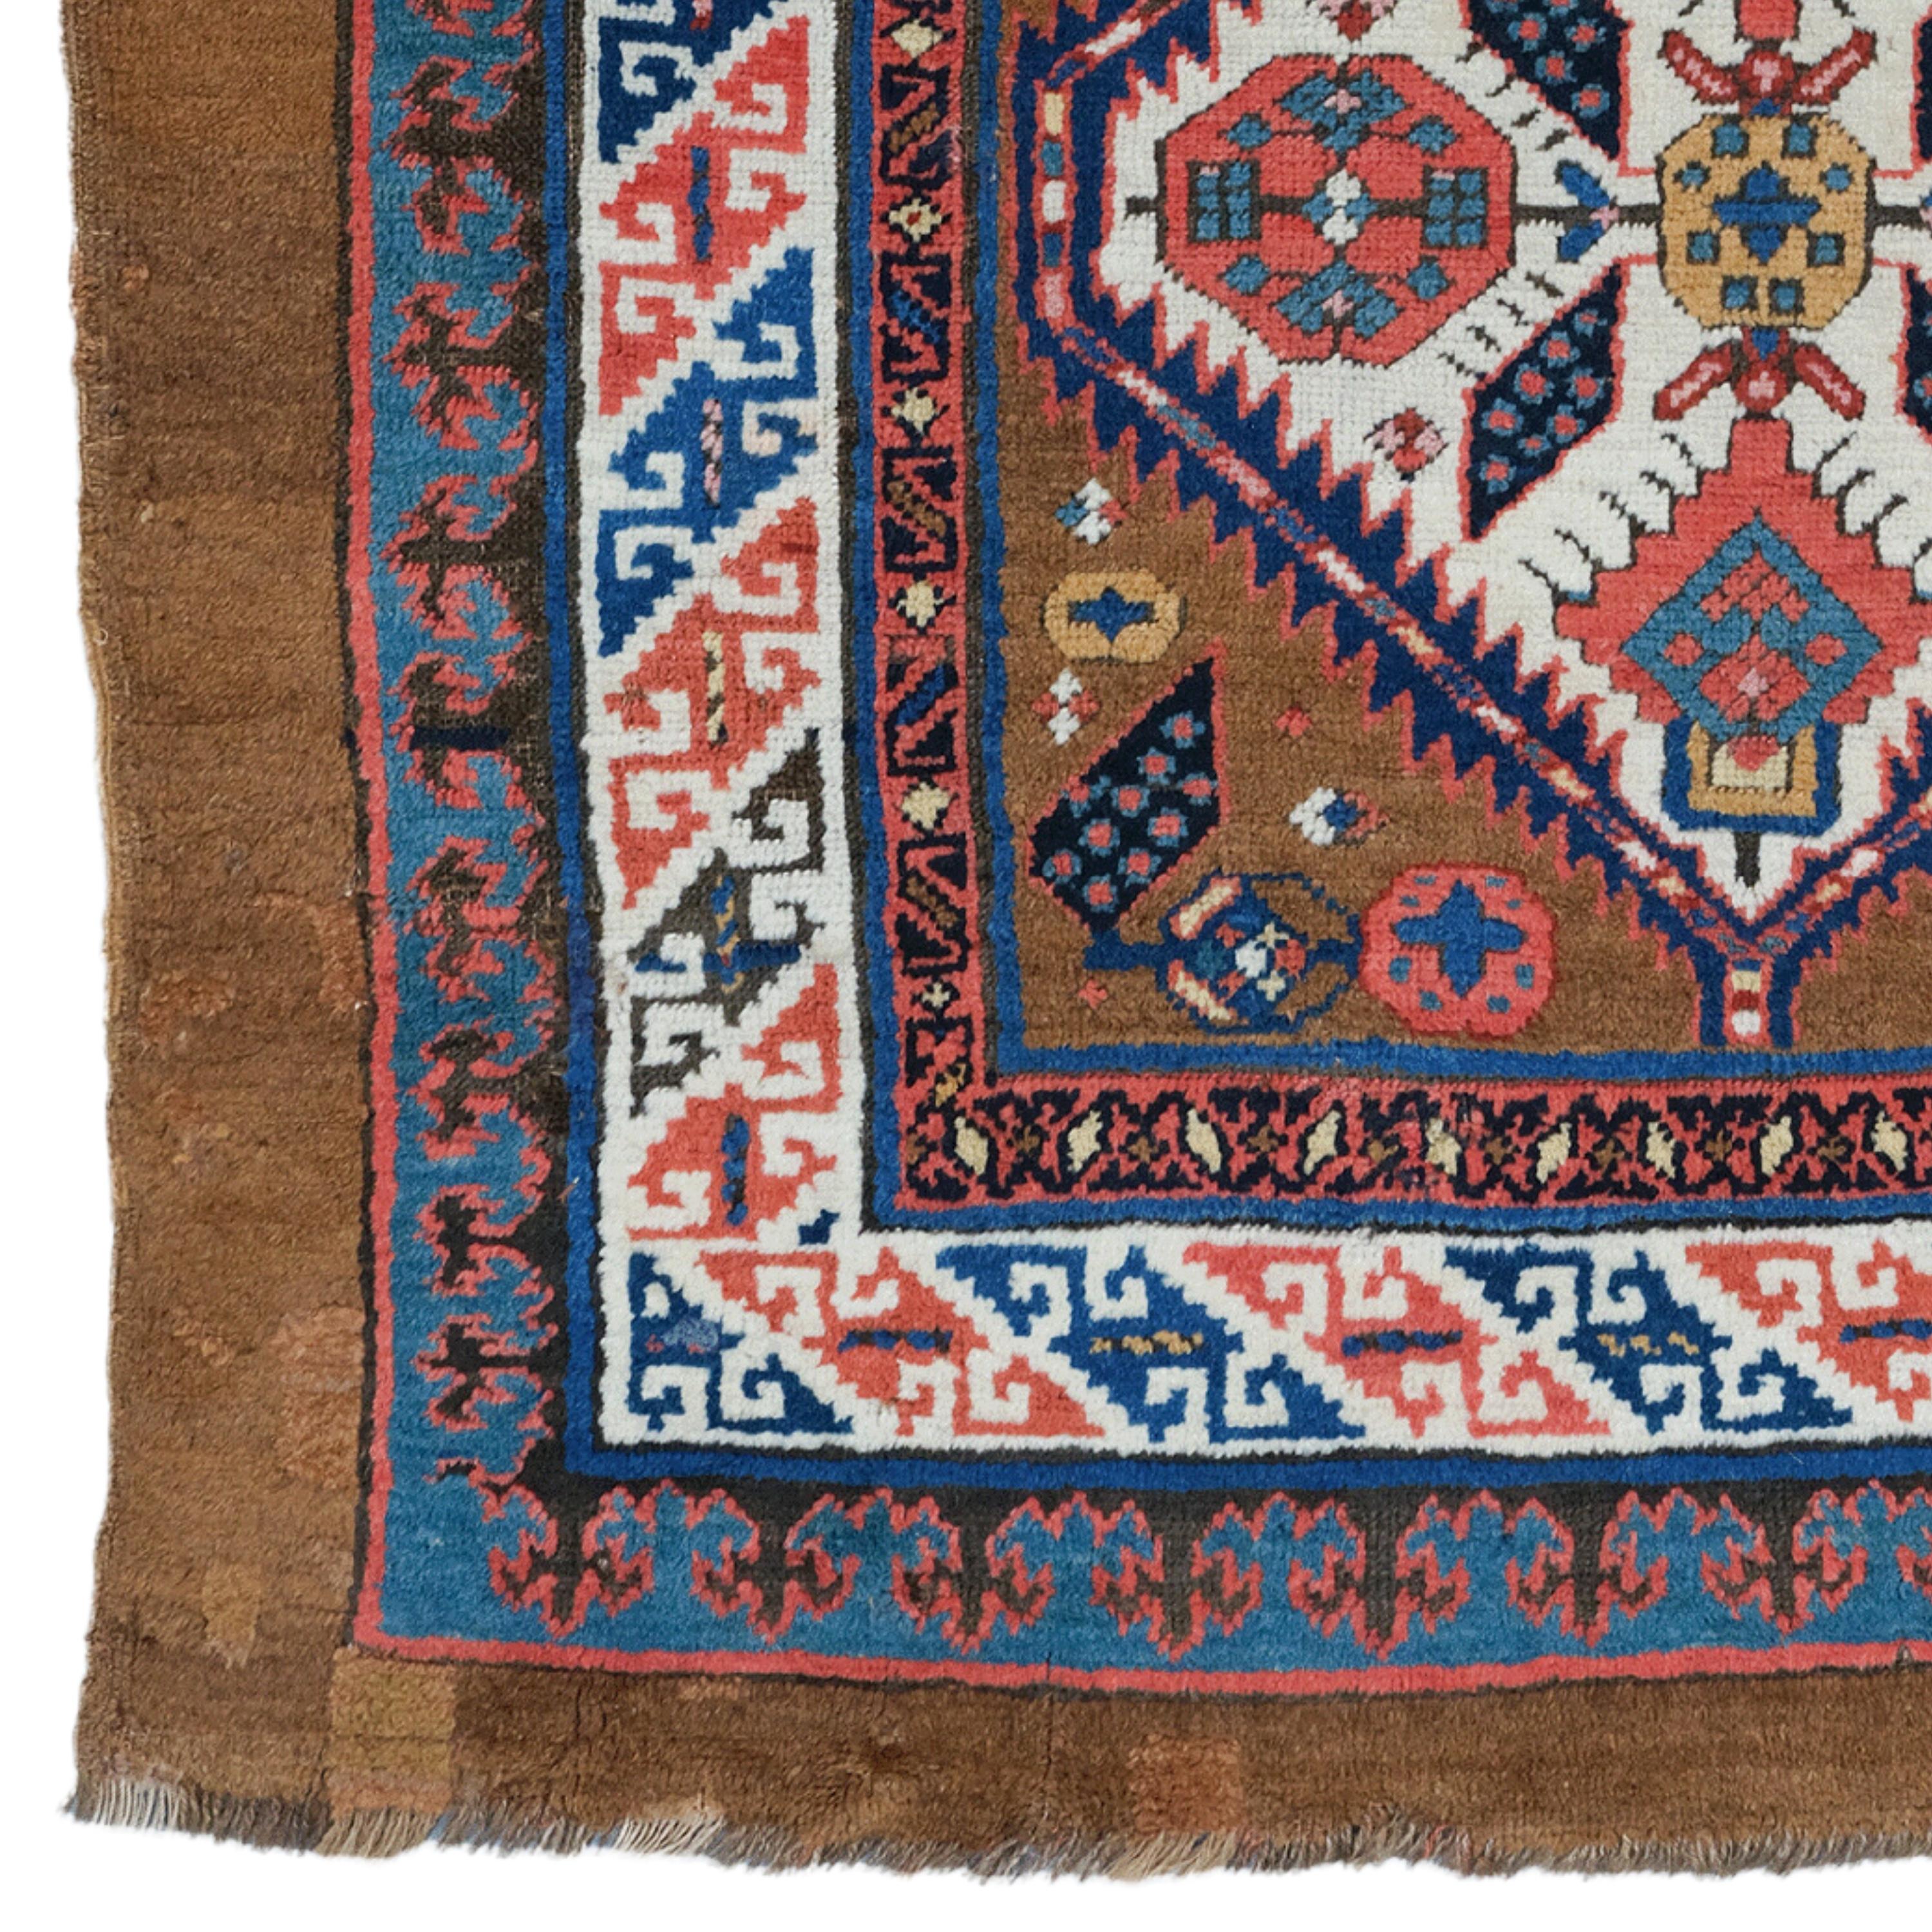 This elegant 19th-century Sarab carpet is an example of the most exquisite craftsmanship of its period. It adds nobility to any space with its rich history and sophisticated design. Vibrant red and golden motifs embroidered on a dark blue background